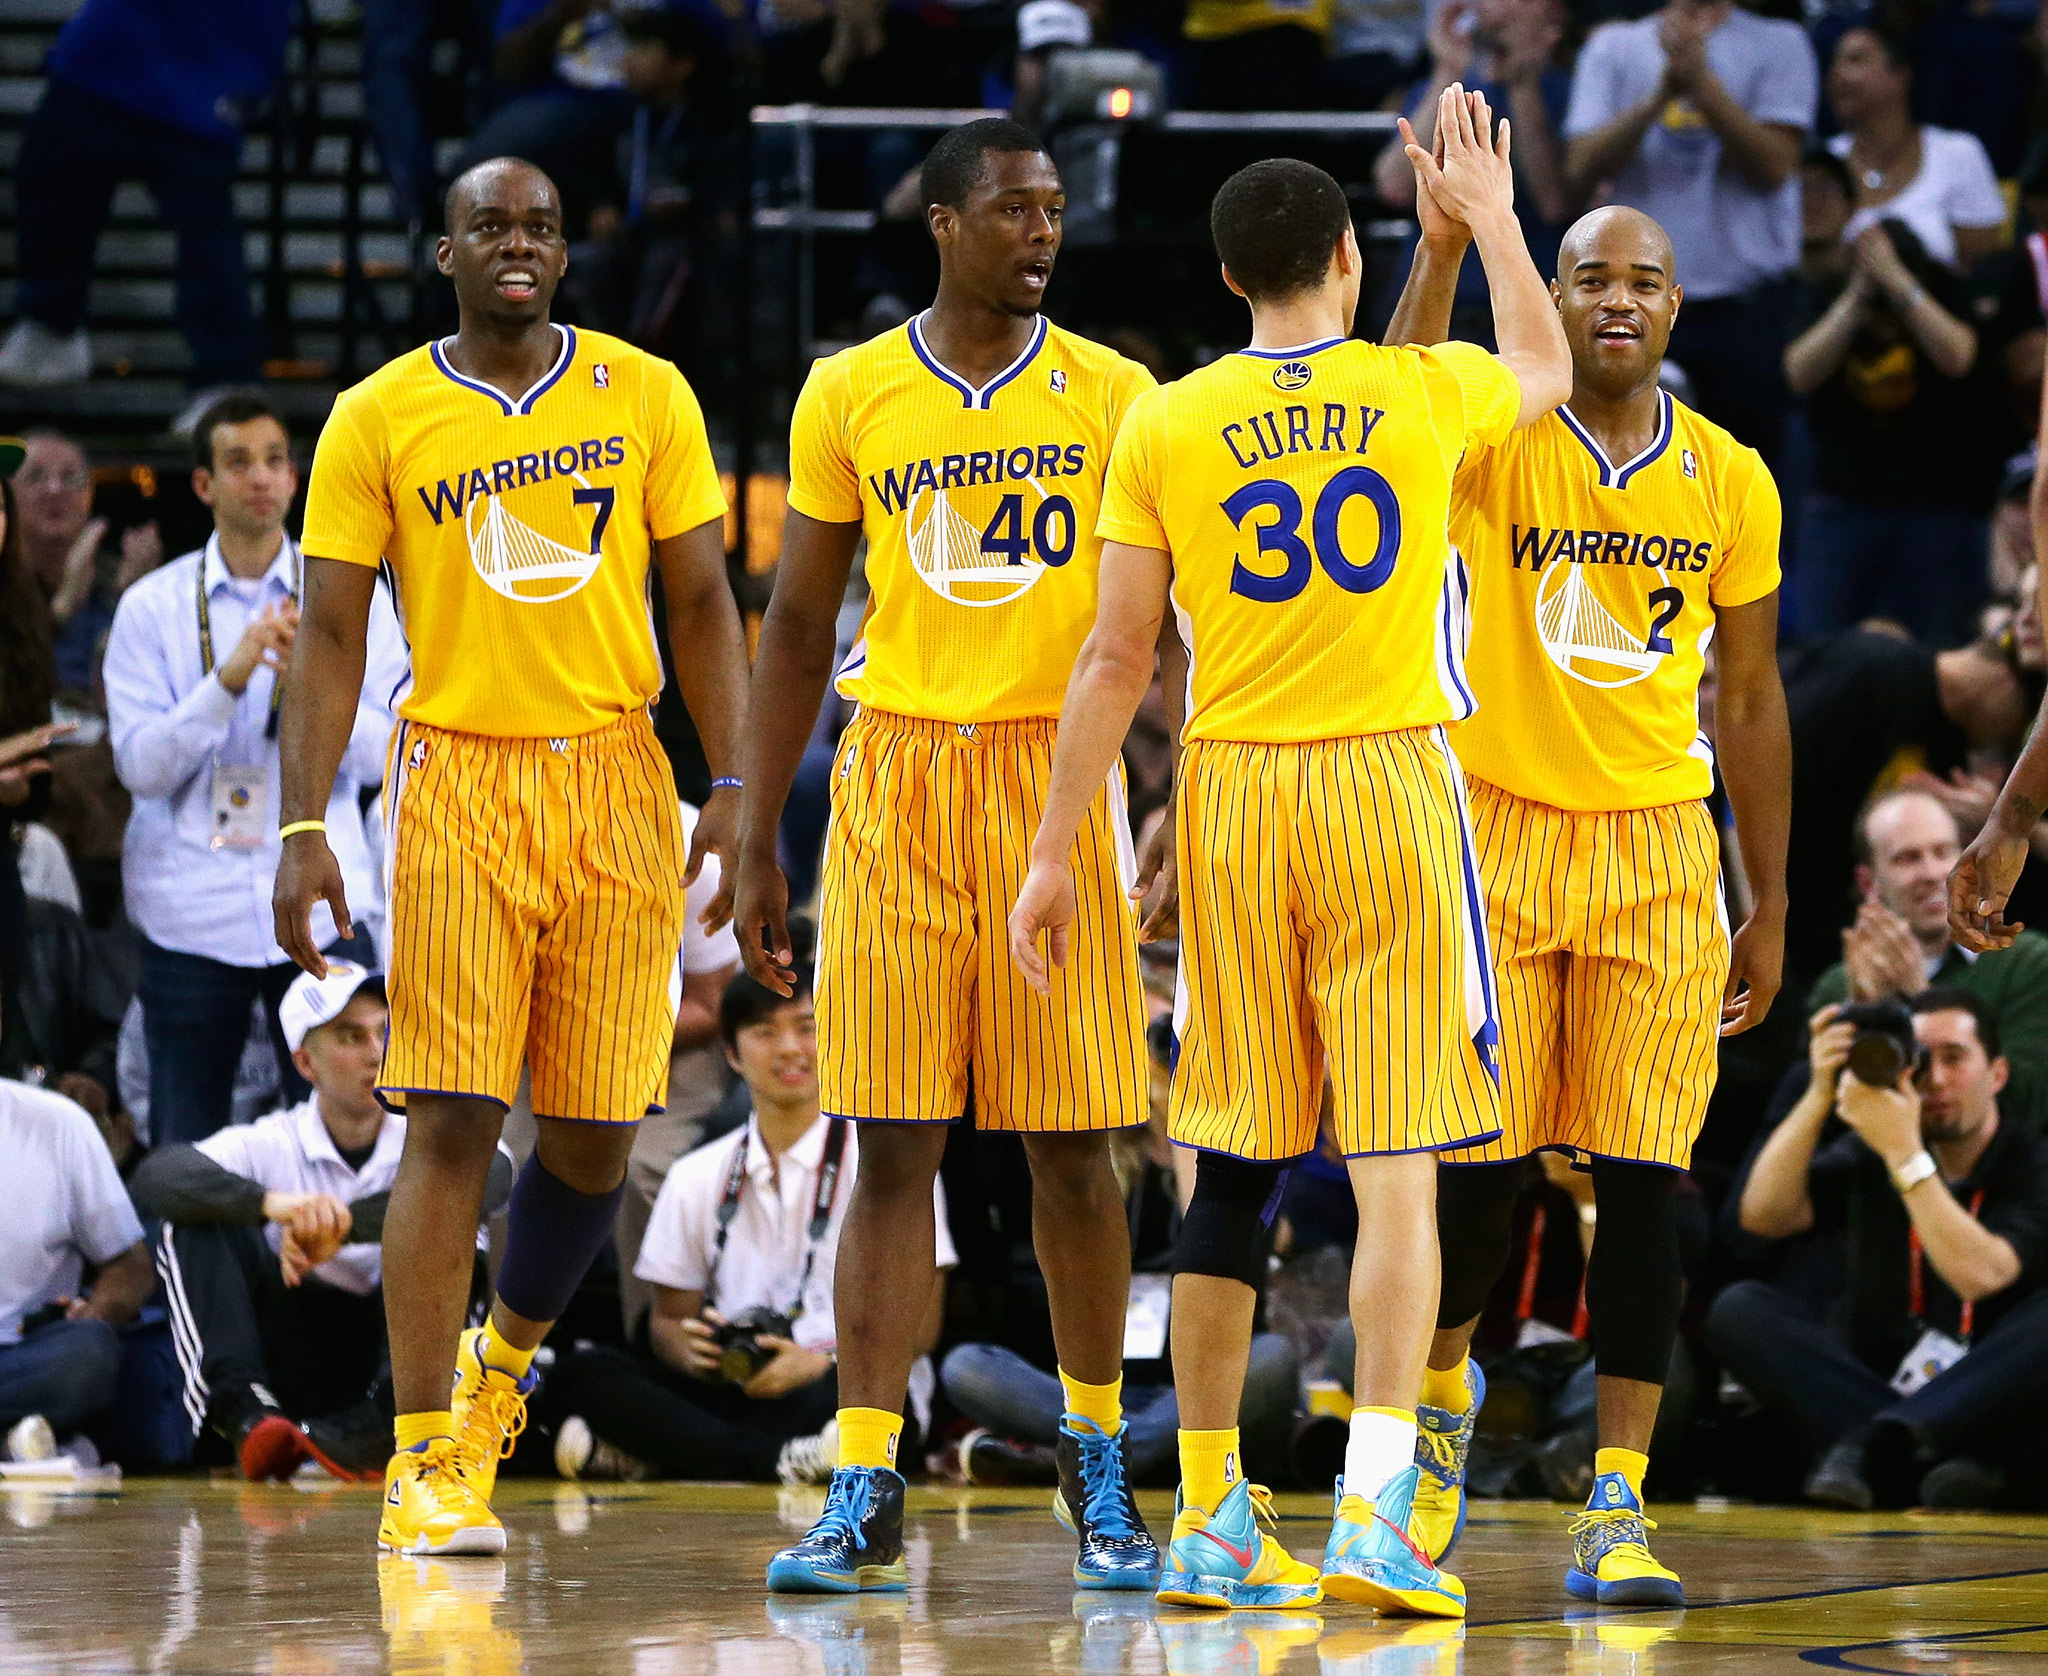 The ongoing evolution of NBA uniforms: the short shorts club